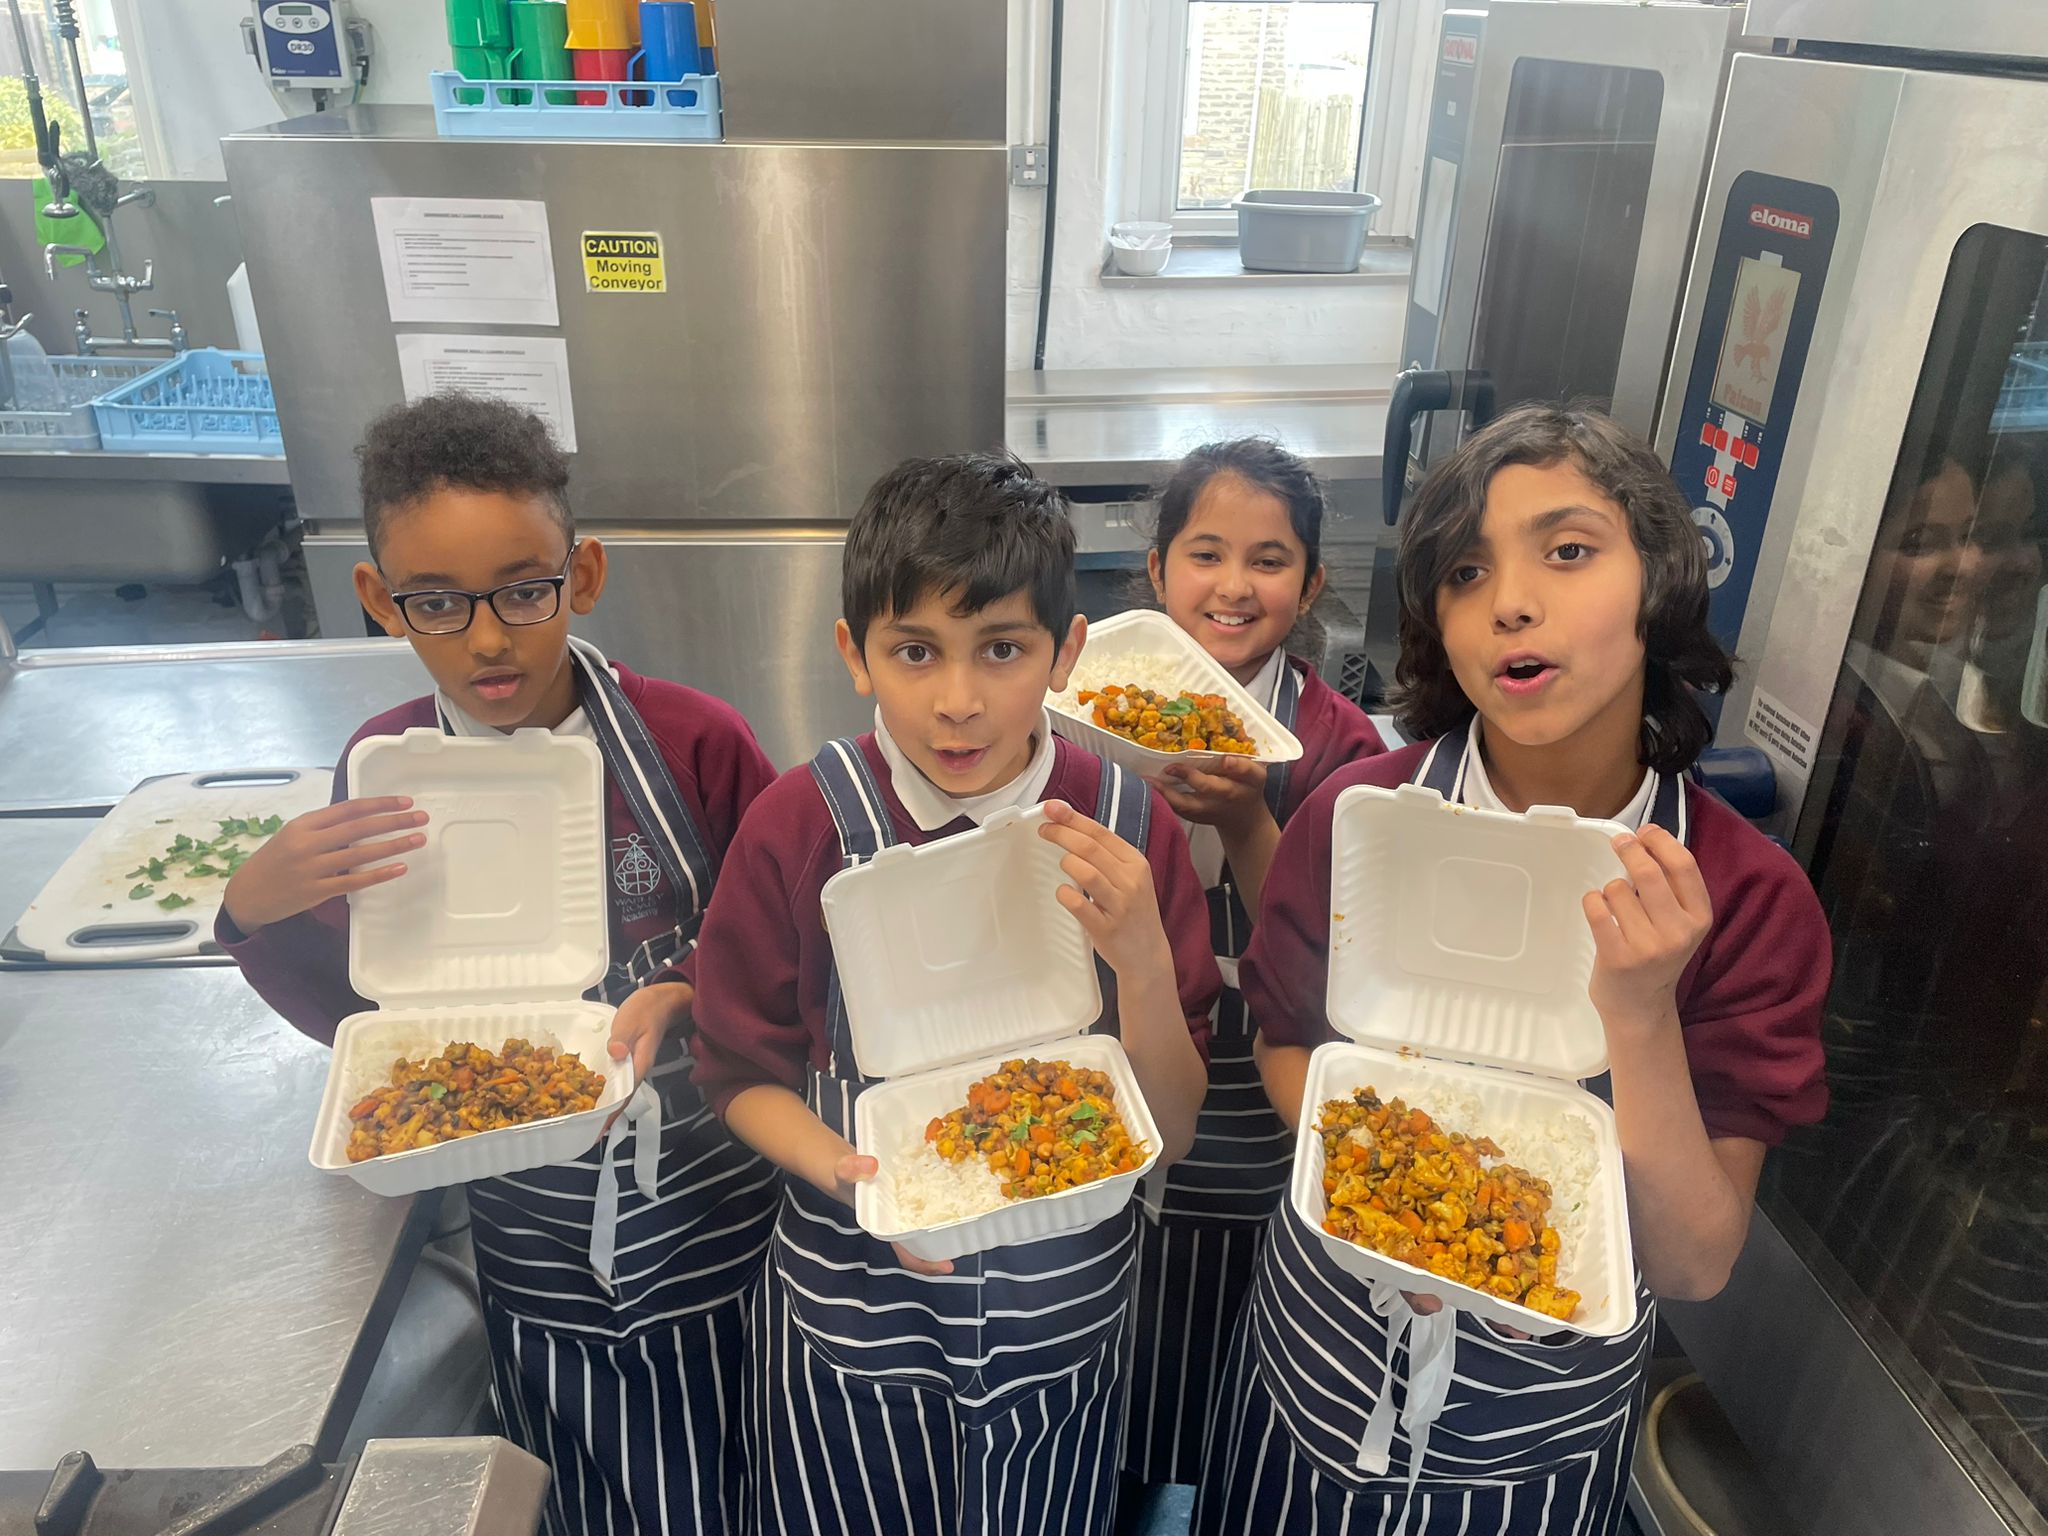 Pupils at Warley Road Primary Academy showing the food they made in Family Cook Clubs